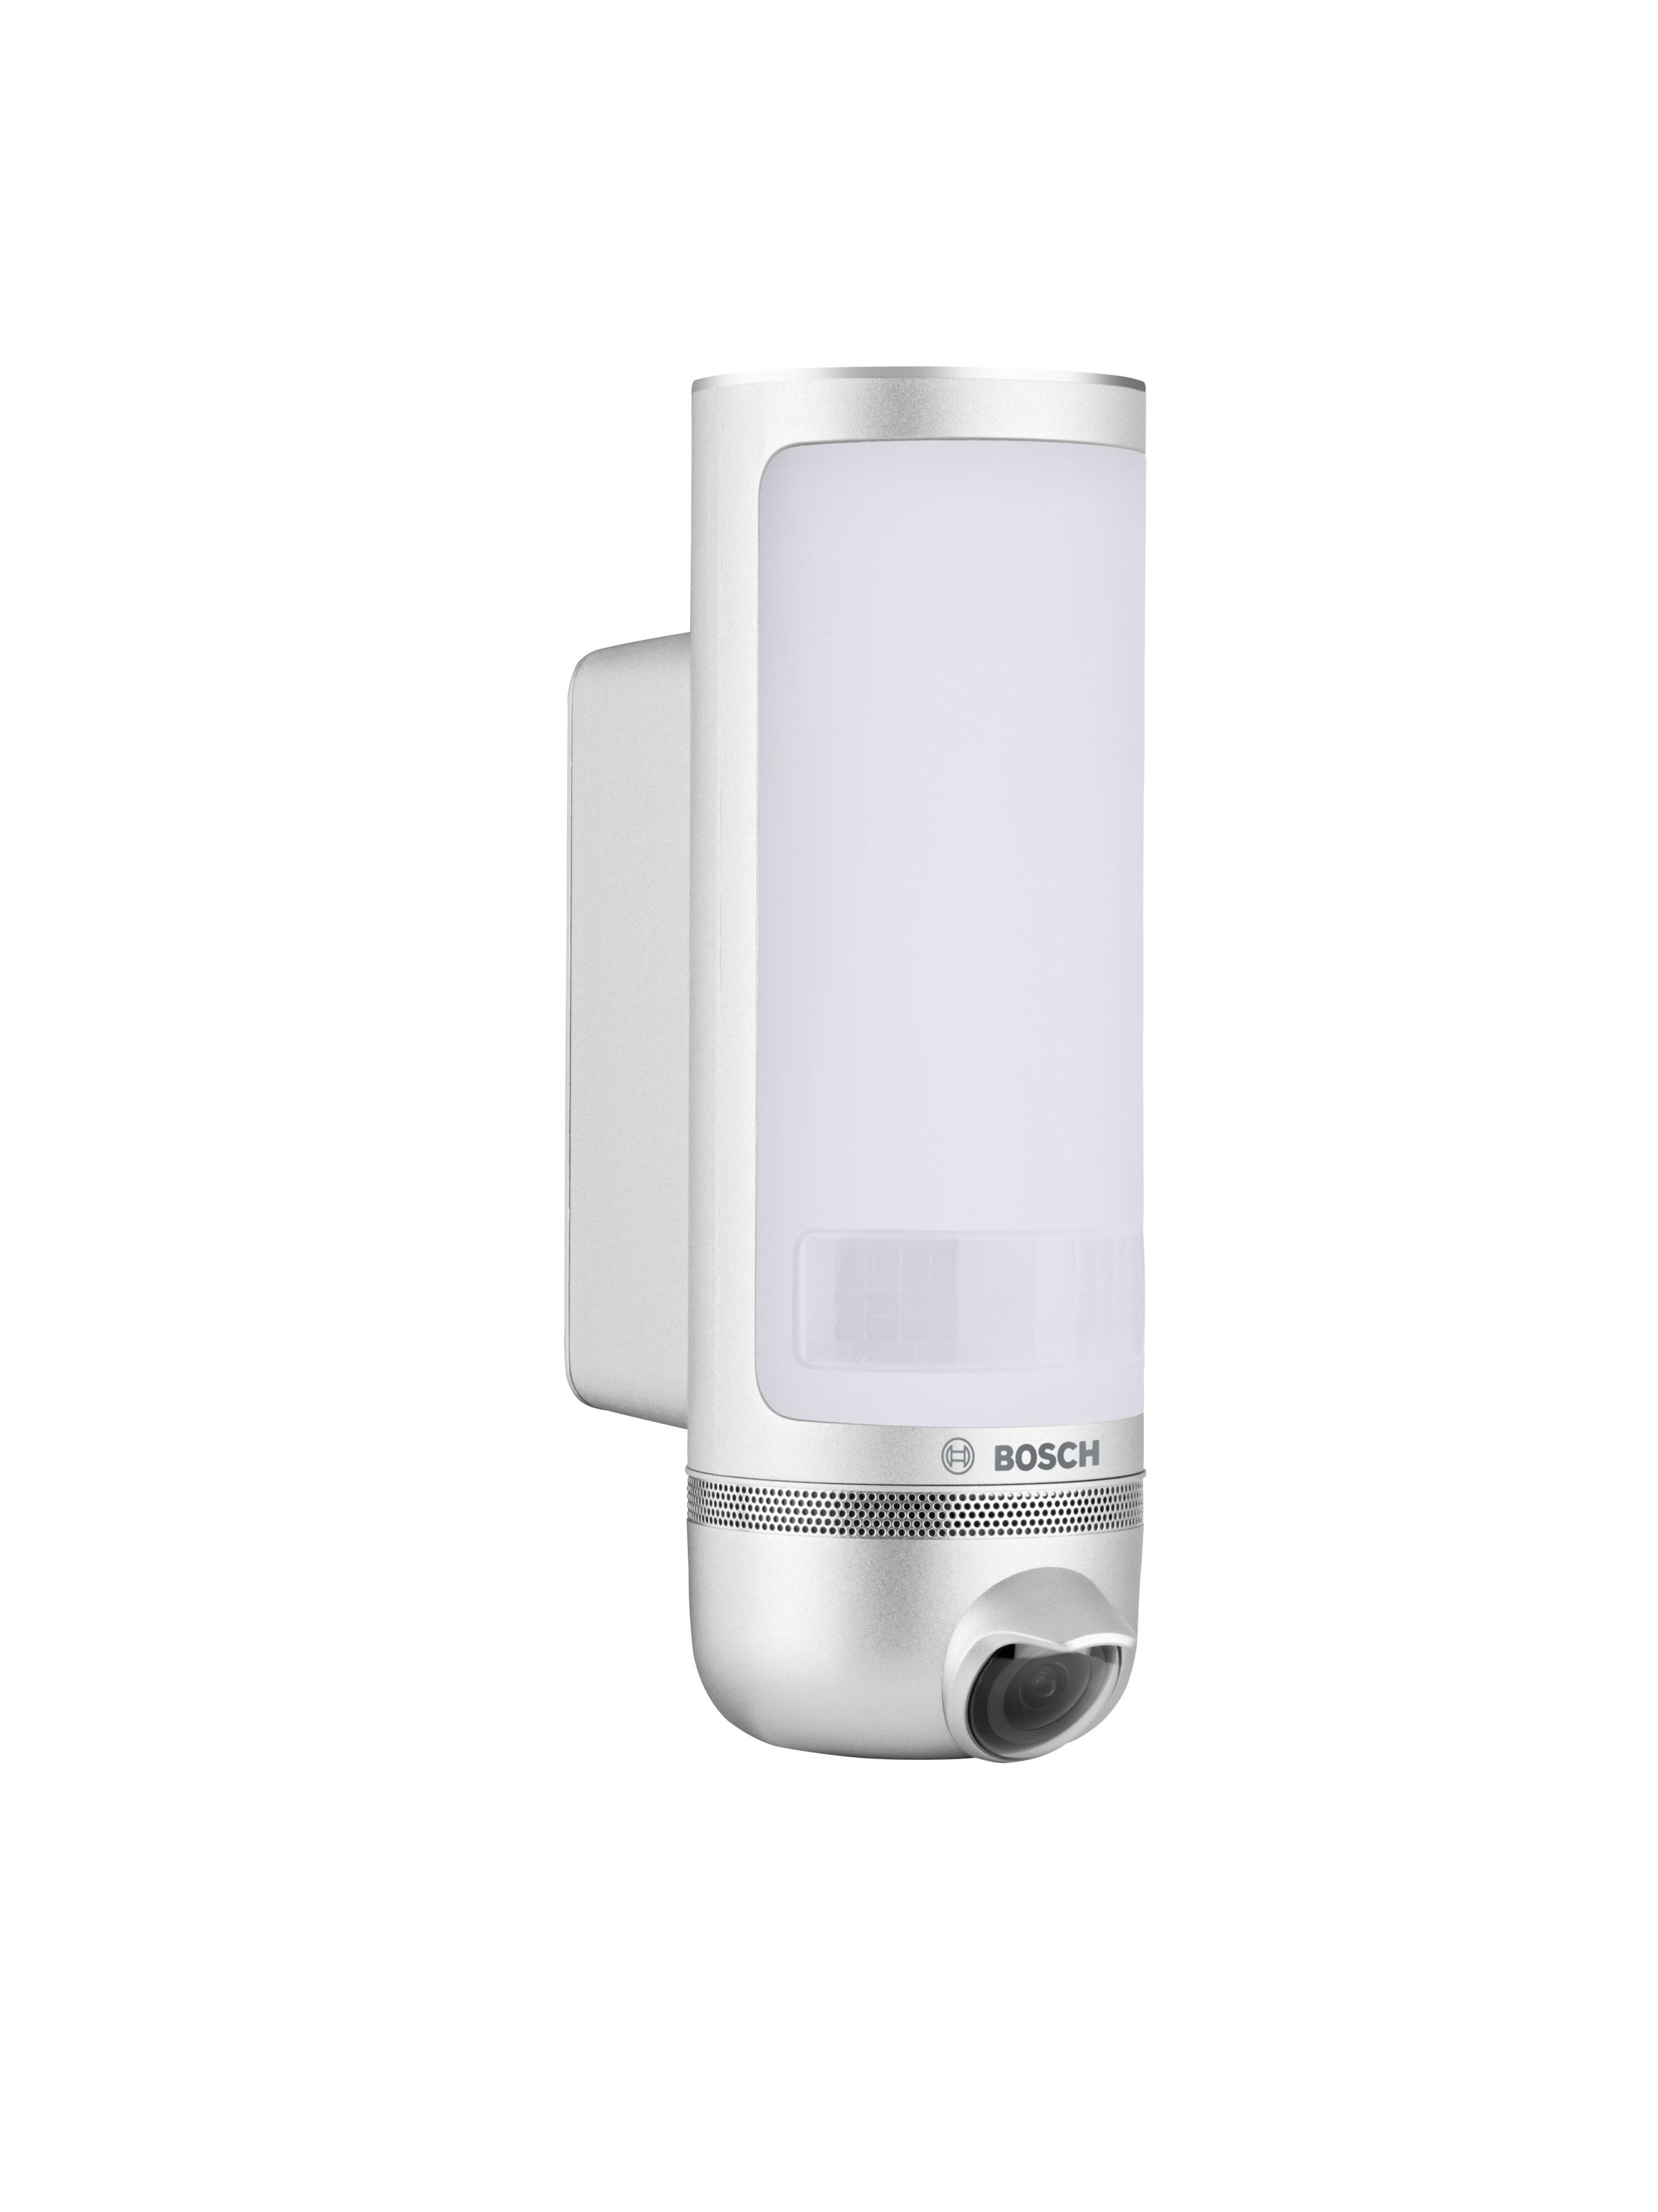 Bosch Smart Home SVO-1601-220 Mains-powered All-in-one camera, Silver